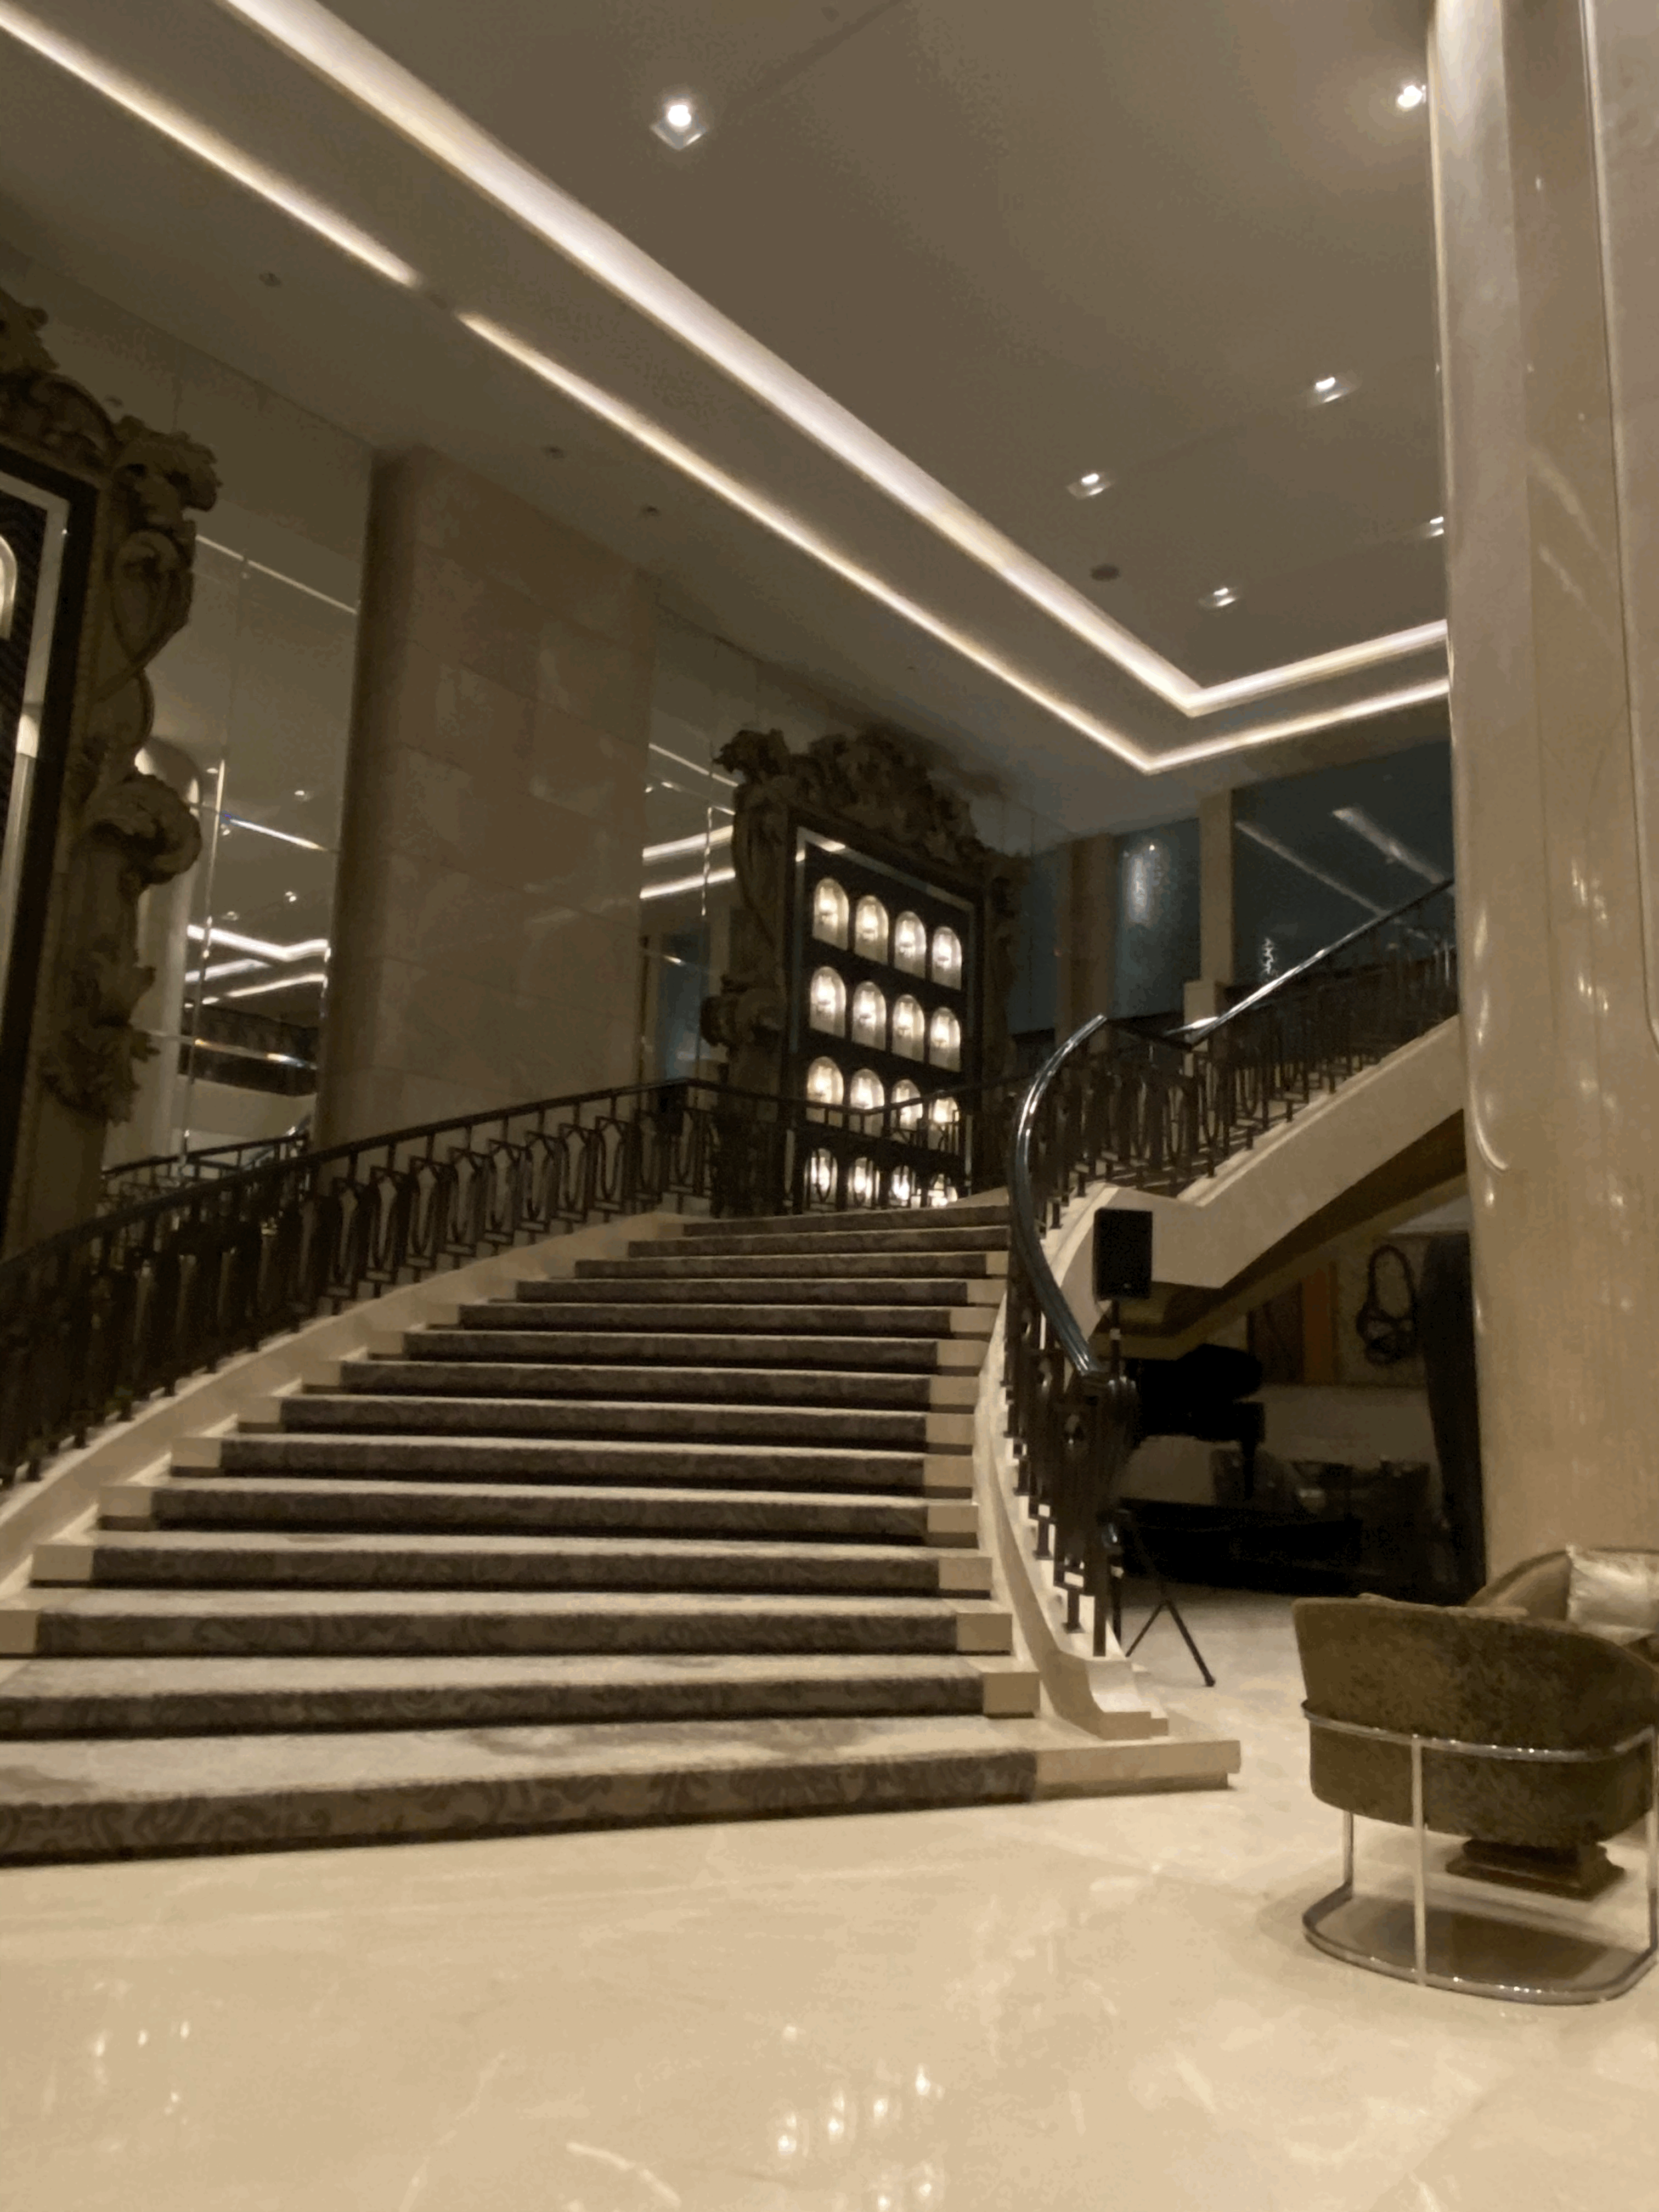 Quick Review: My Staycation at St. Regis, Mumbai